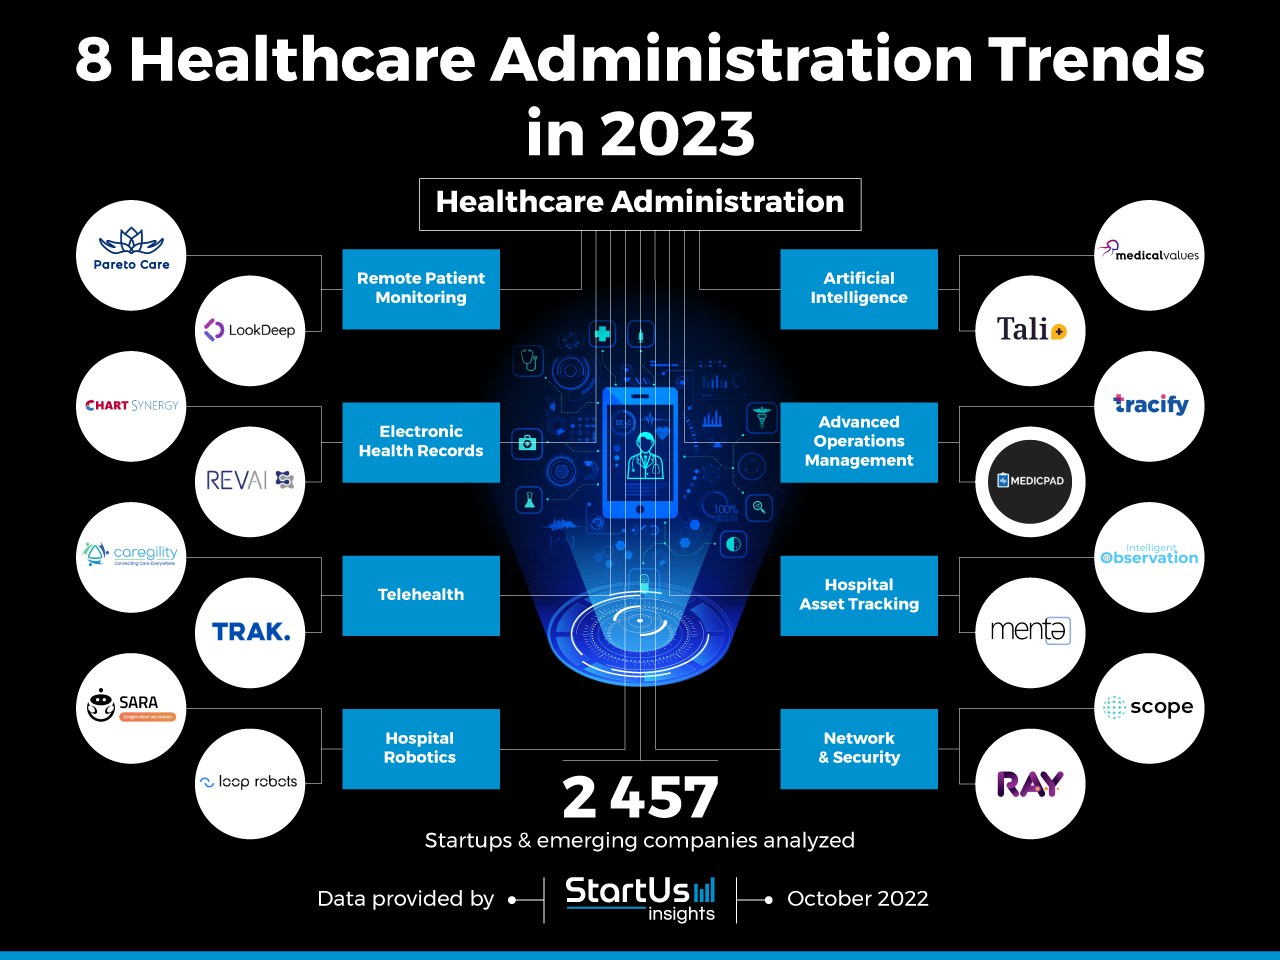 Healthcare-Administration-trends-innovation-InnovationMap-StartUs-Insights-noresize